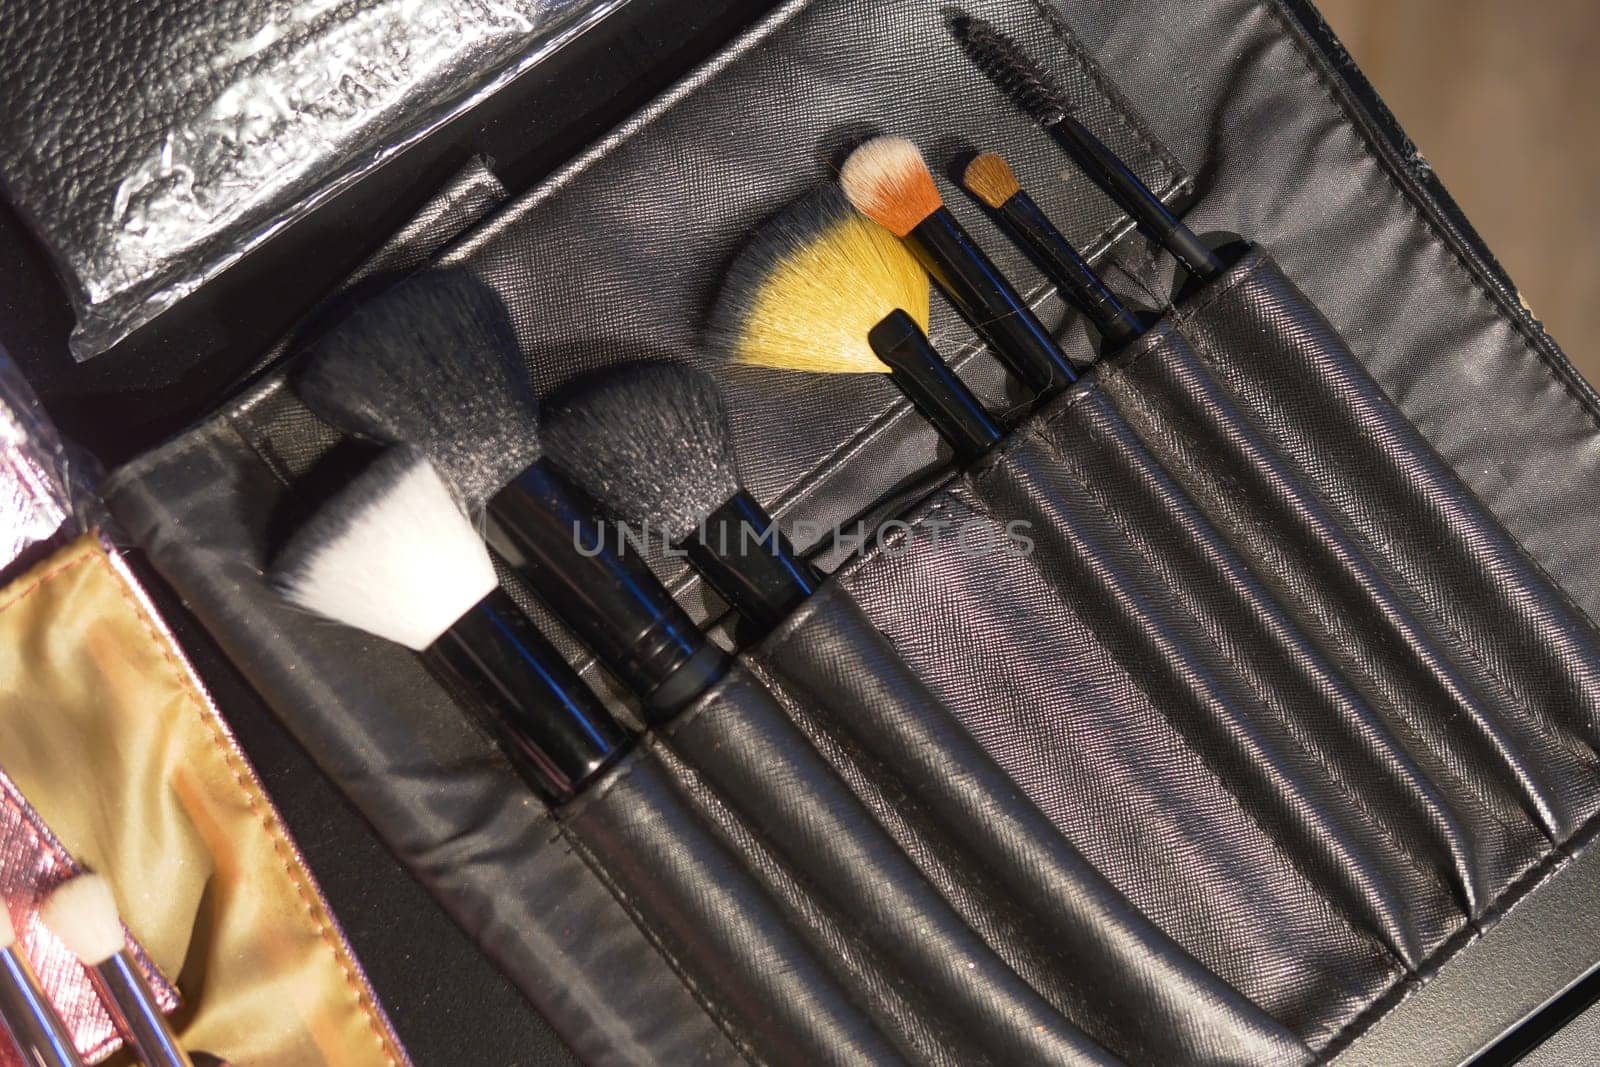 A set of makeup tools made of wood and metal, stored in a sleek black case. Perfect for those who love to experiment with different looks